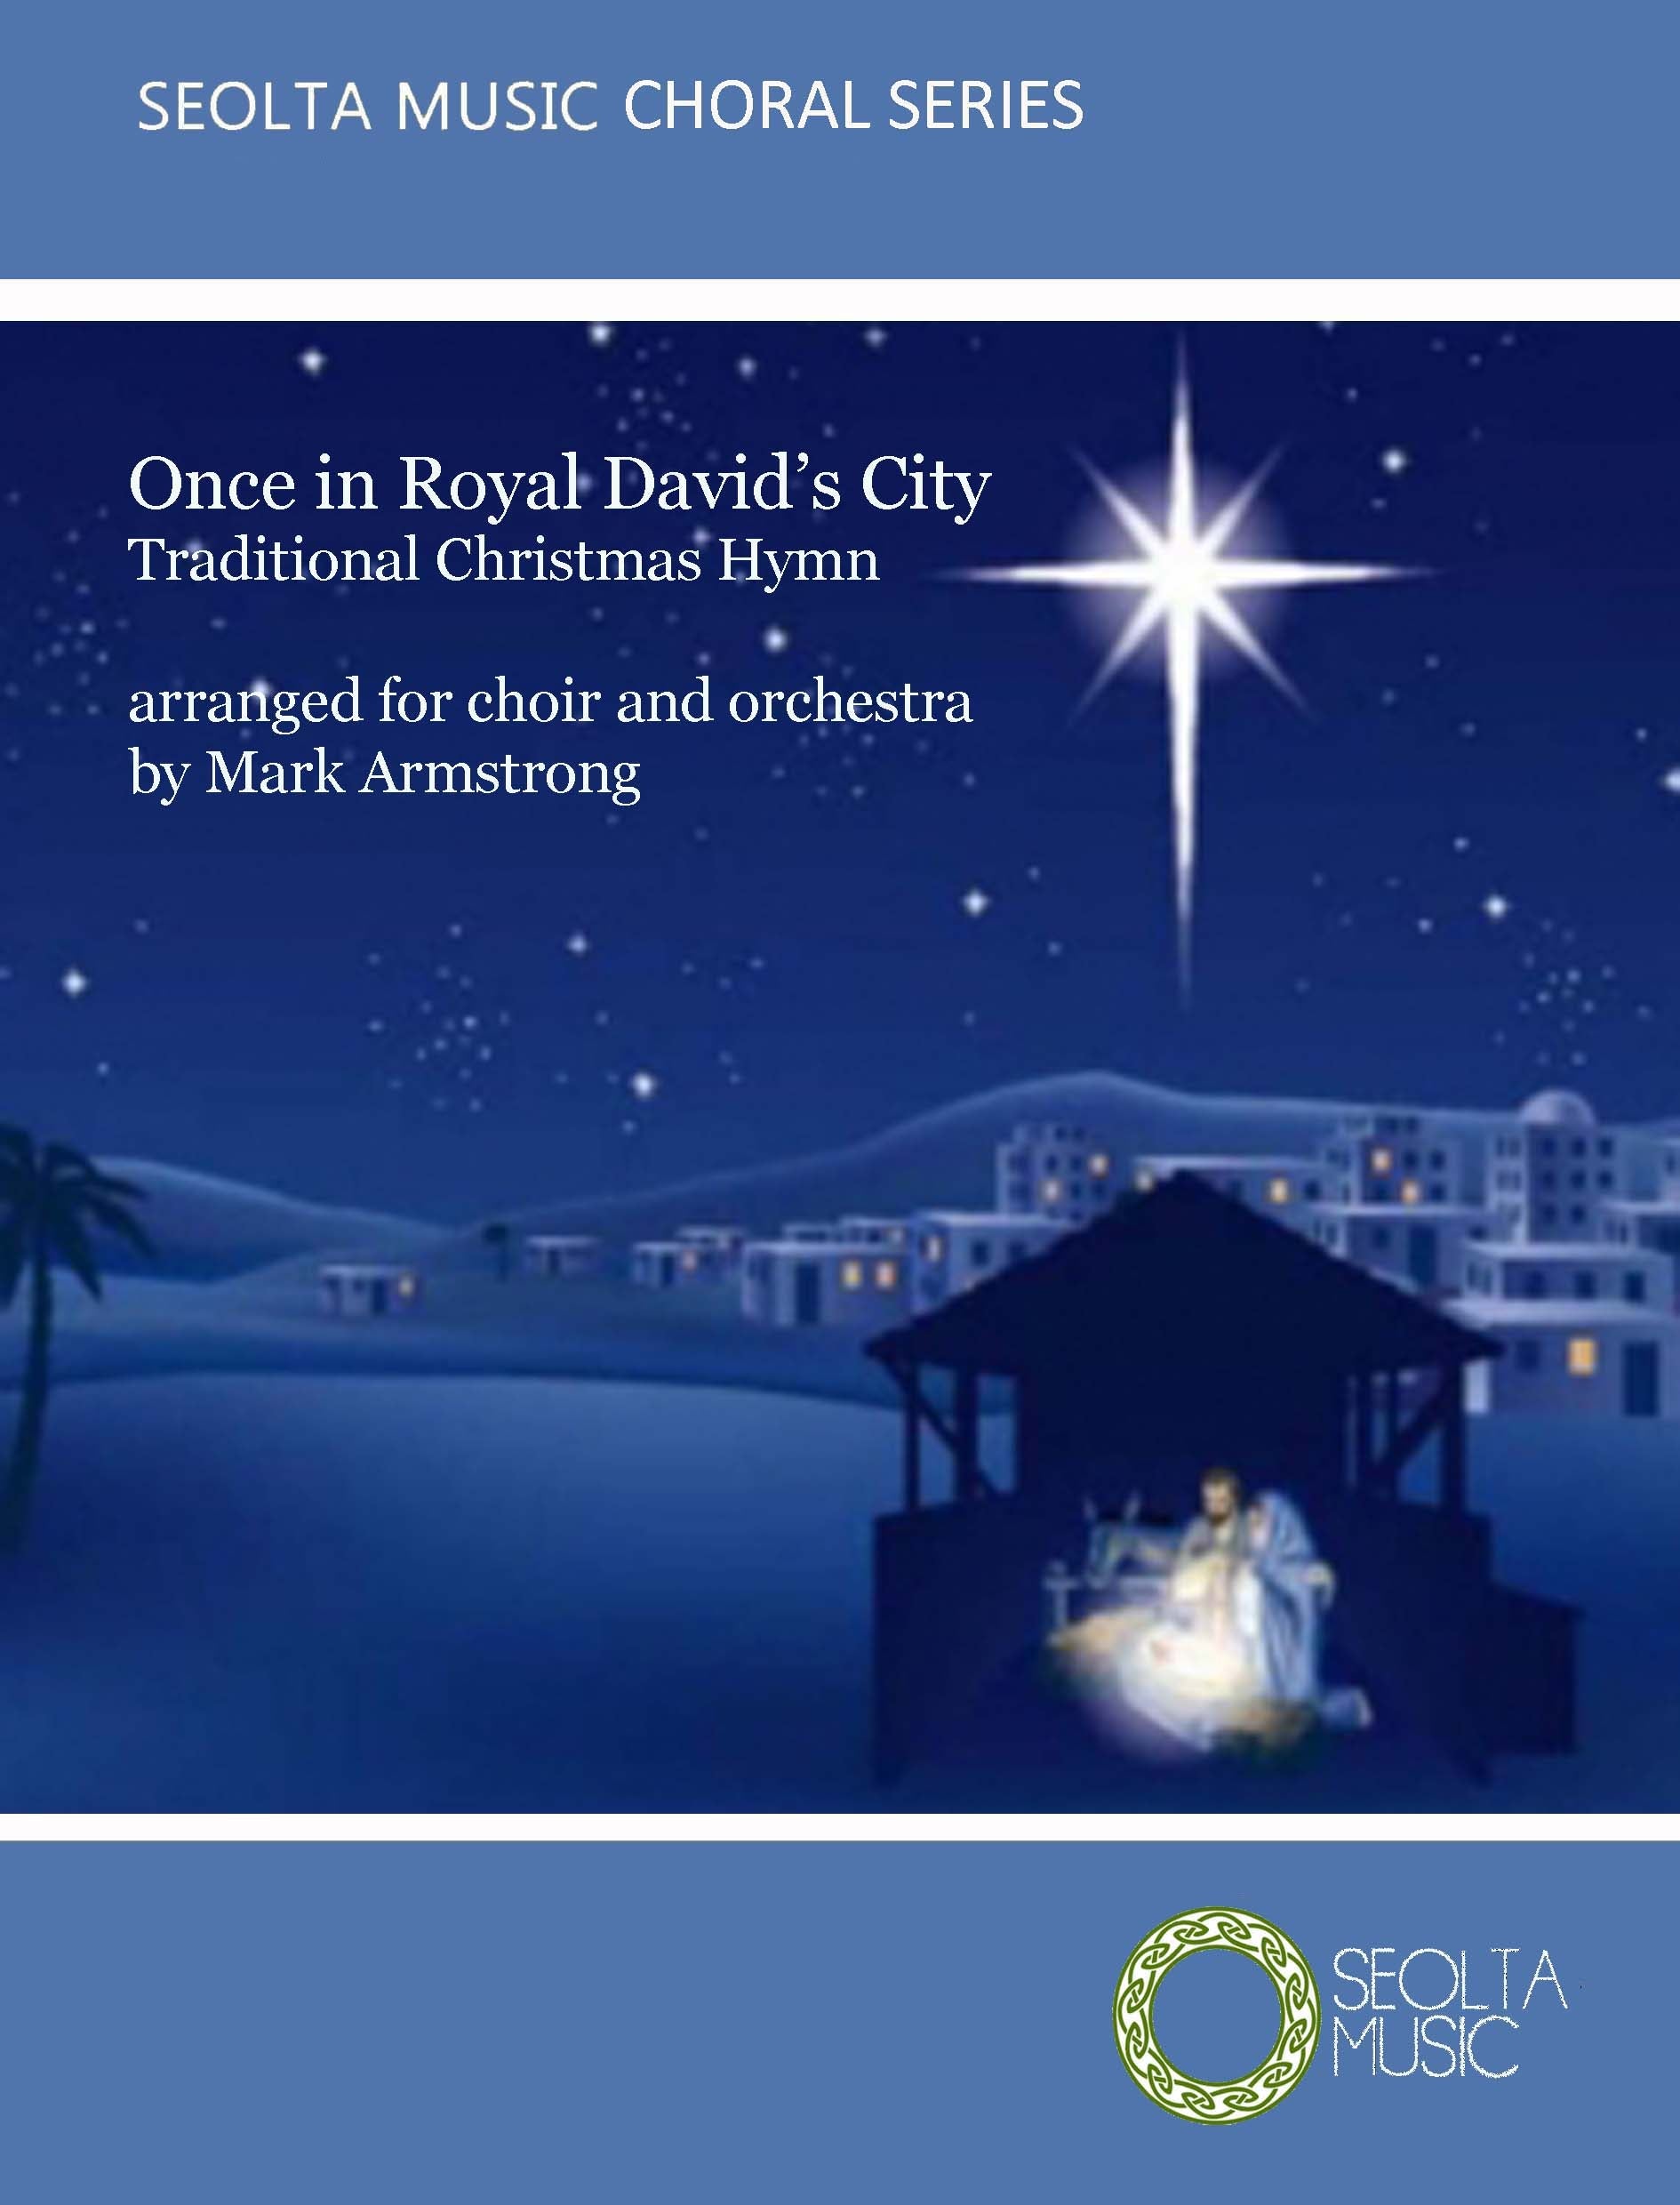 once-in-royal-david-s-city-choir-orchestra-sheet-music